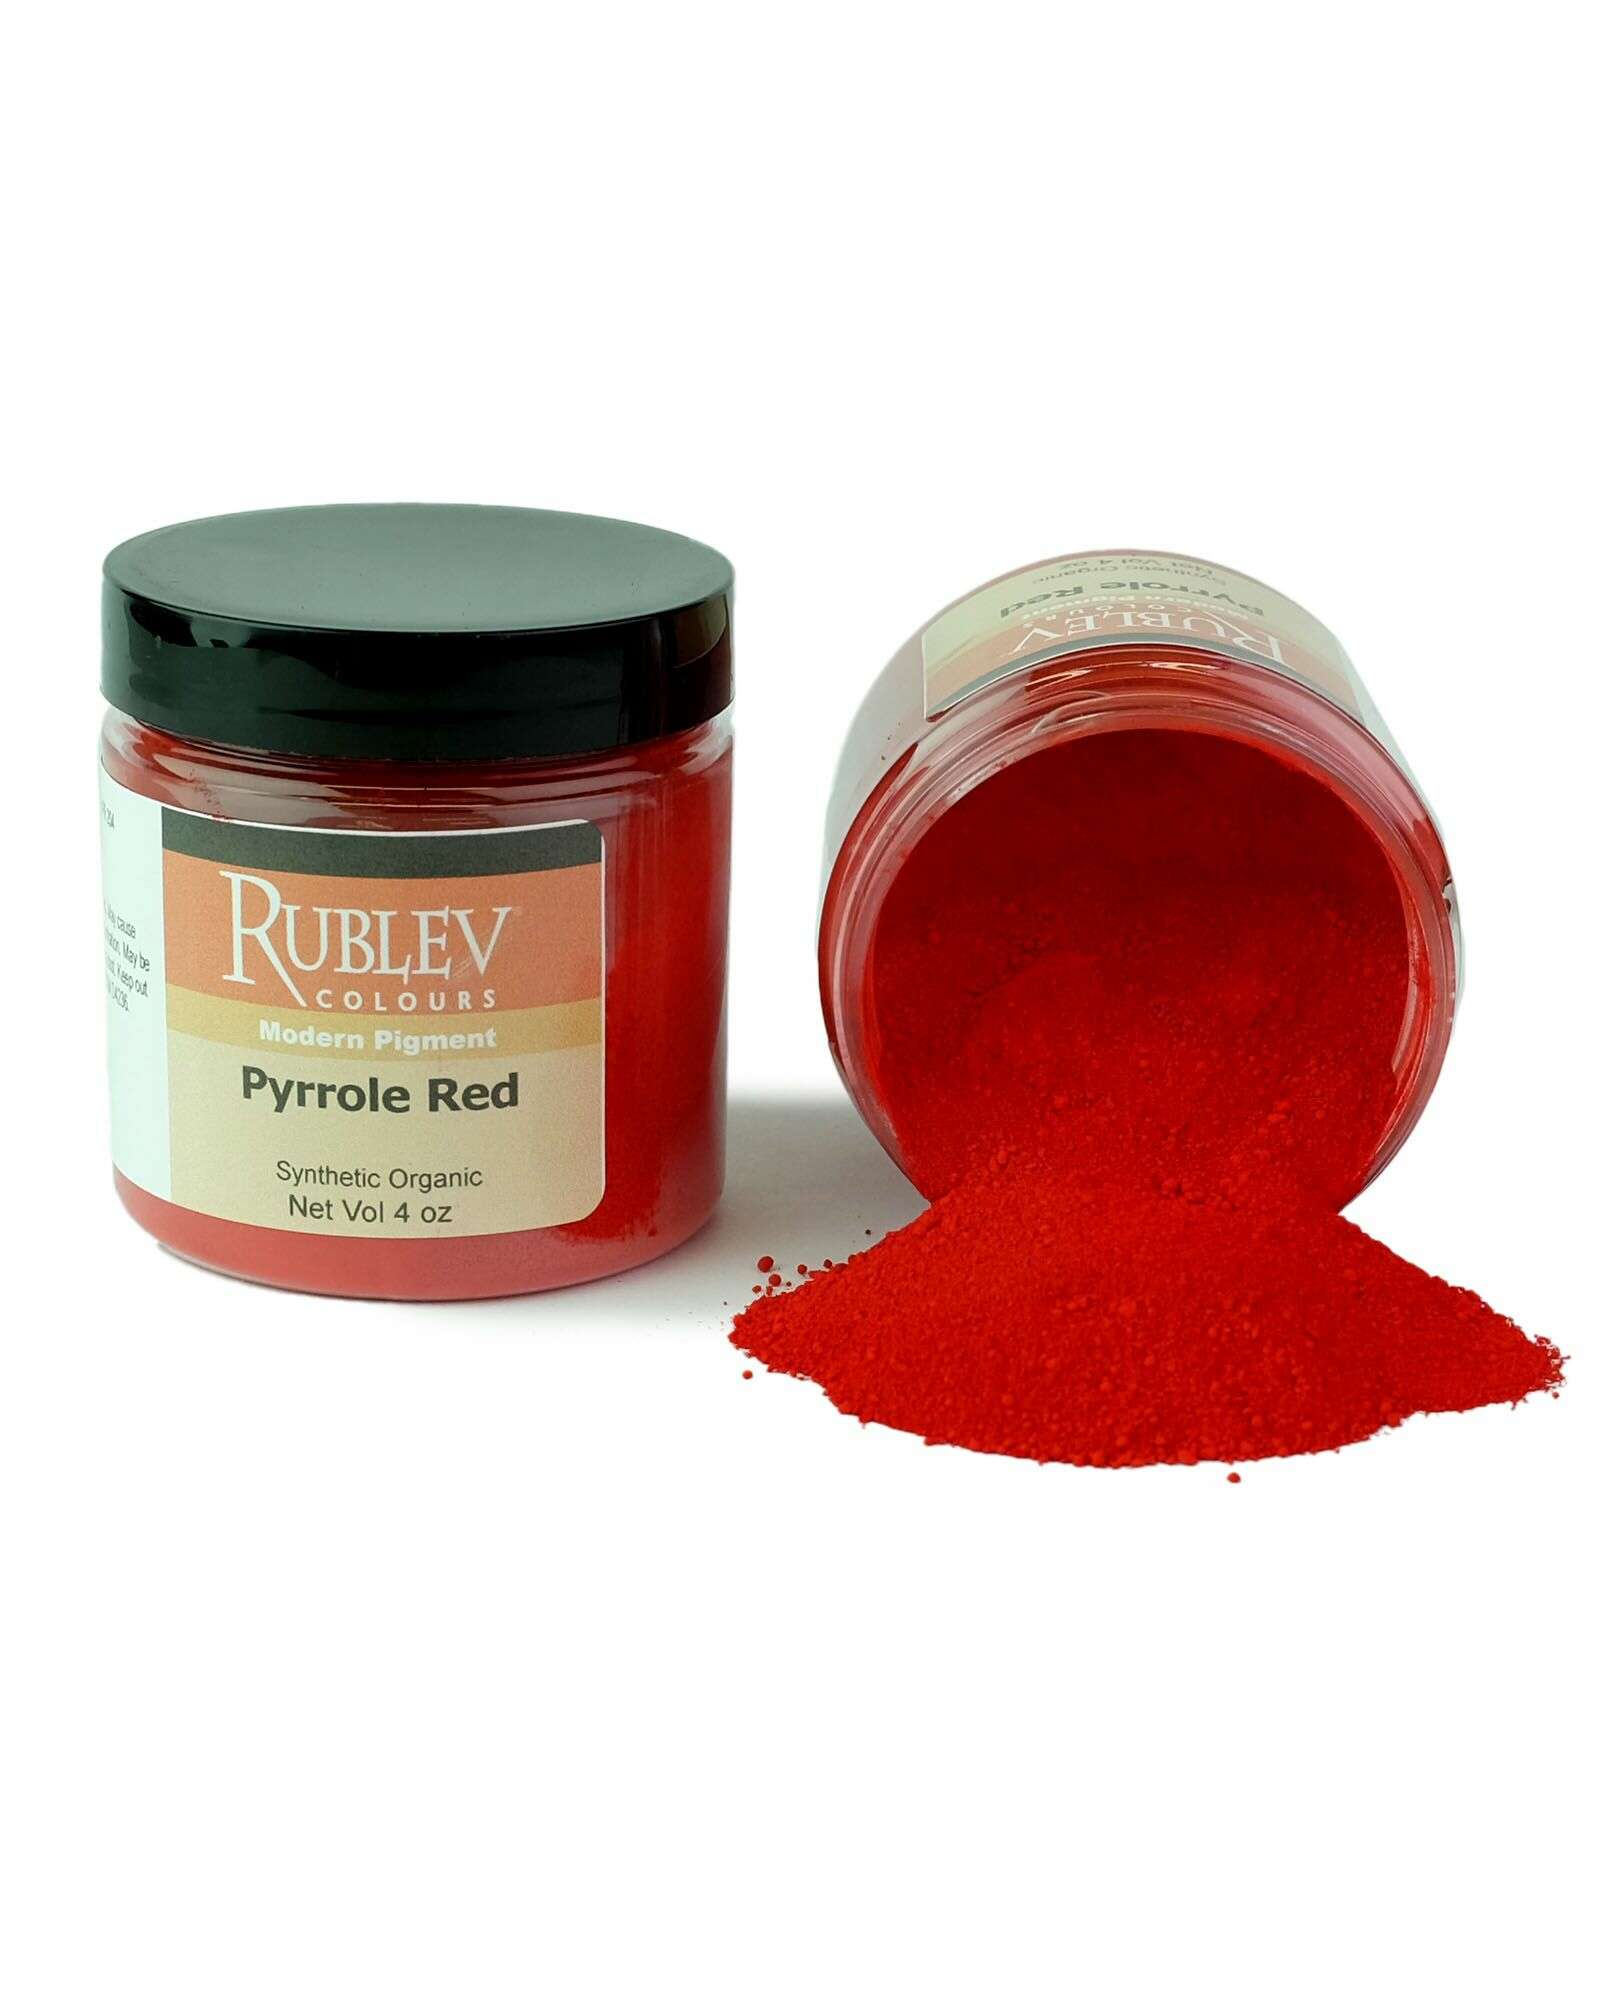 bluse Ekspert krøllet Rare and Hard to Find Art Supplies | Shop Natural Pigments - Pyrrole |  Rublev Colours Pyrrole Red Pigment 4 oz vol | Pigments, Oil Paint,  Watercolors, Cold Wax